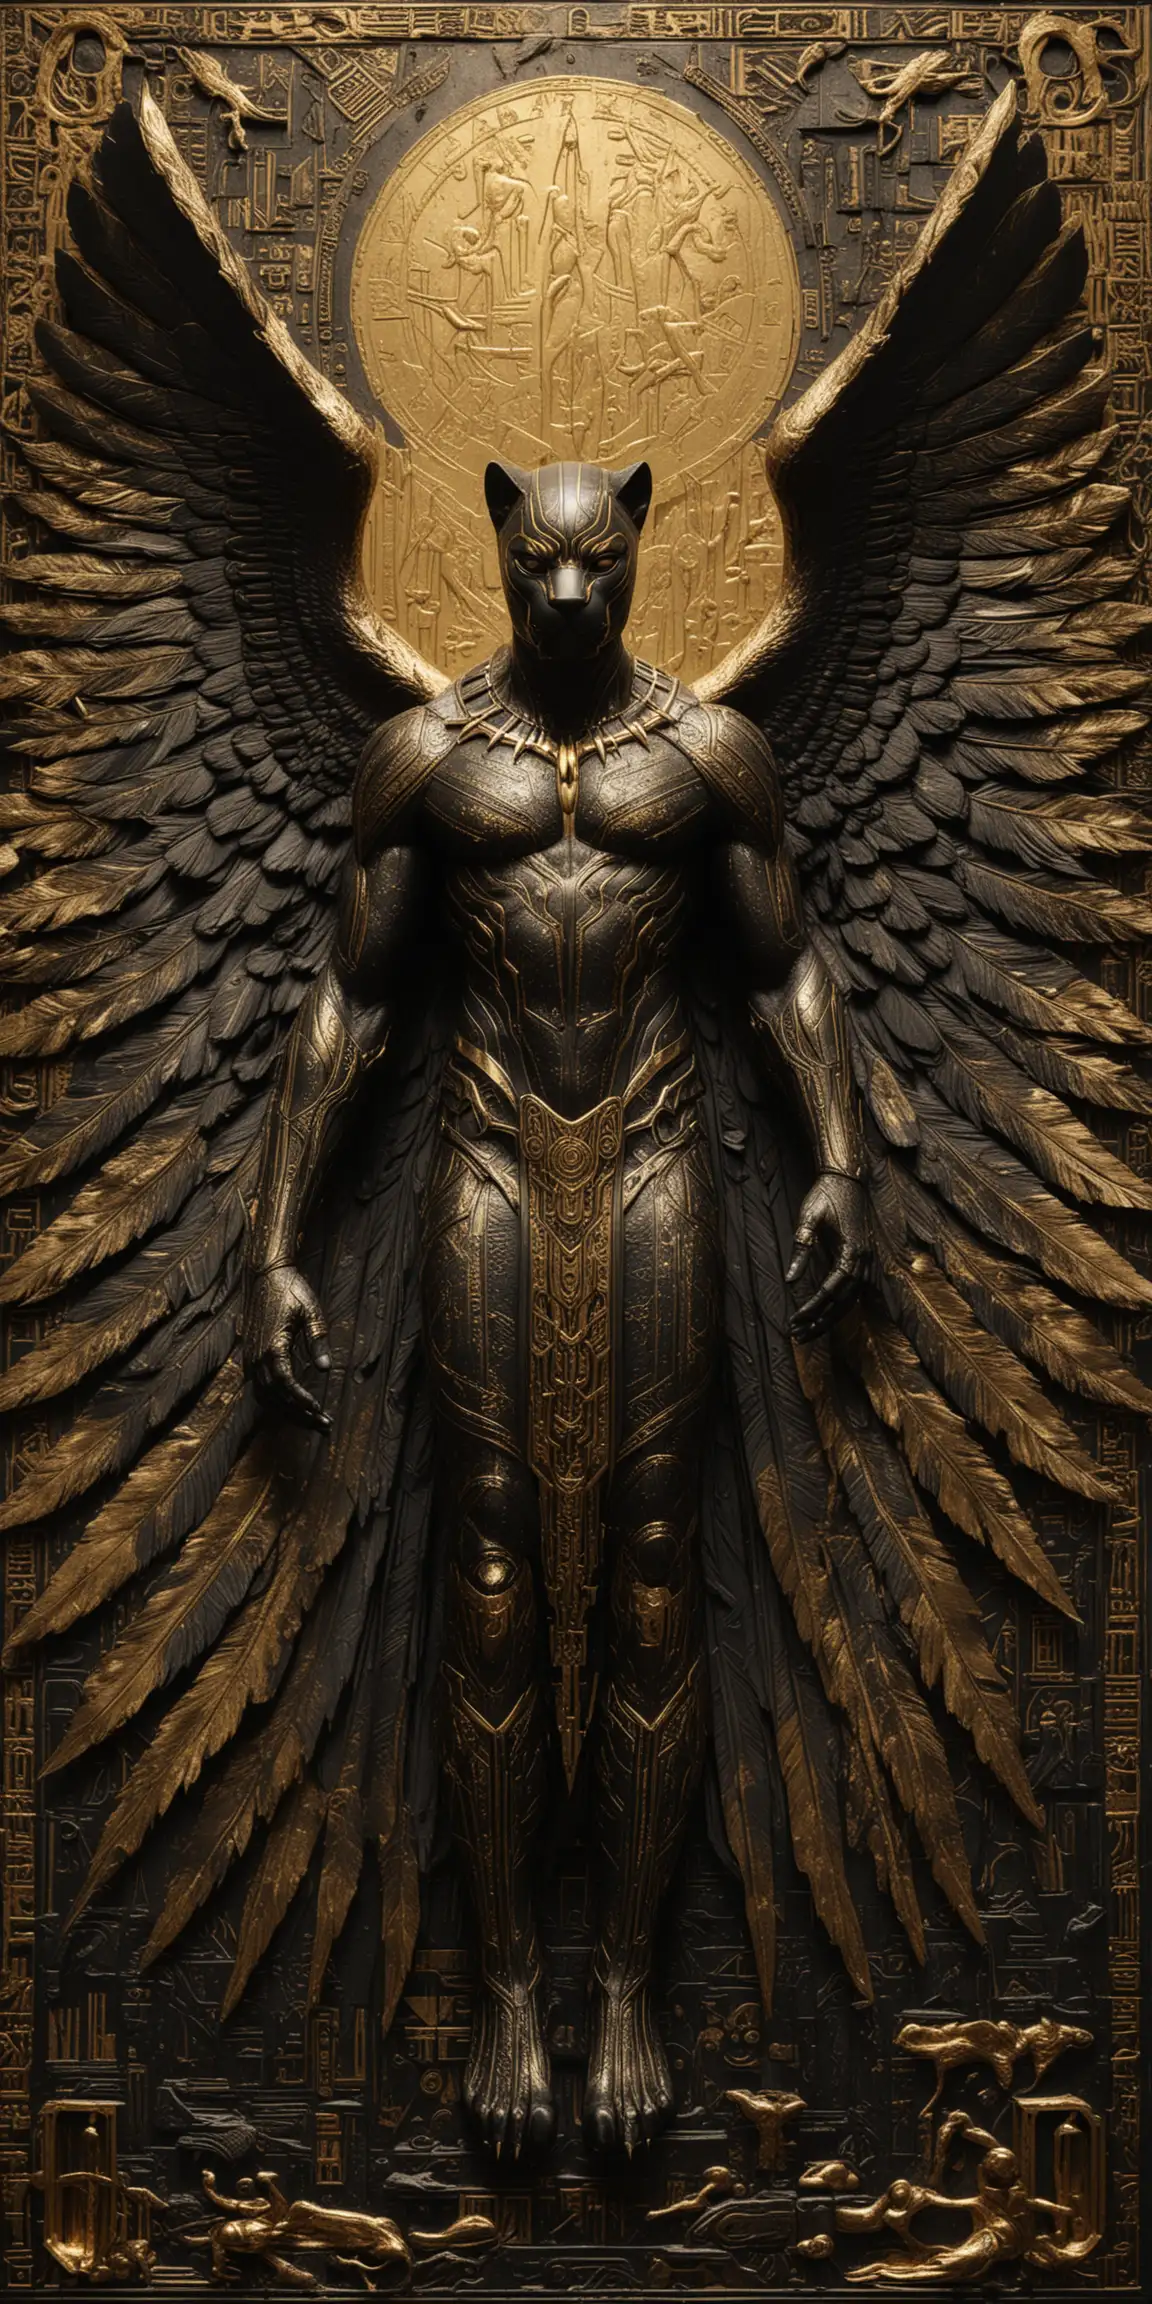 a sheet of gold metal. black wakandan etchings. black panther with large angel wings. hieroglyphics. no humans. surreal. multi-depths. very intricately and microscopically detailed.